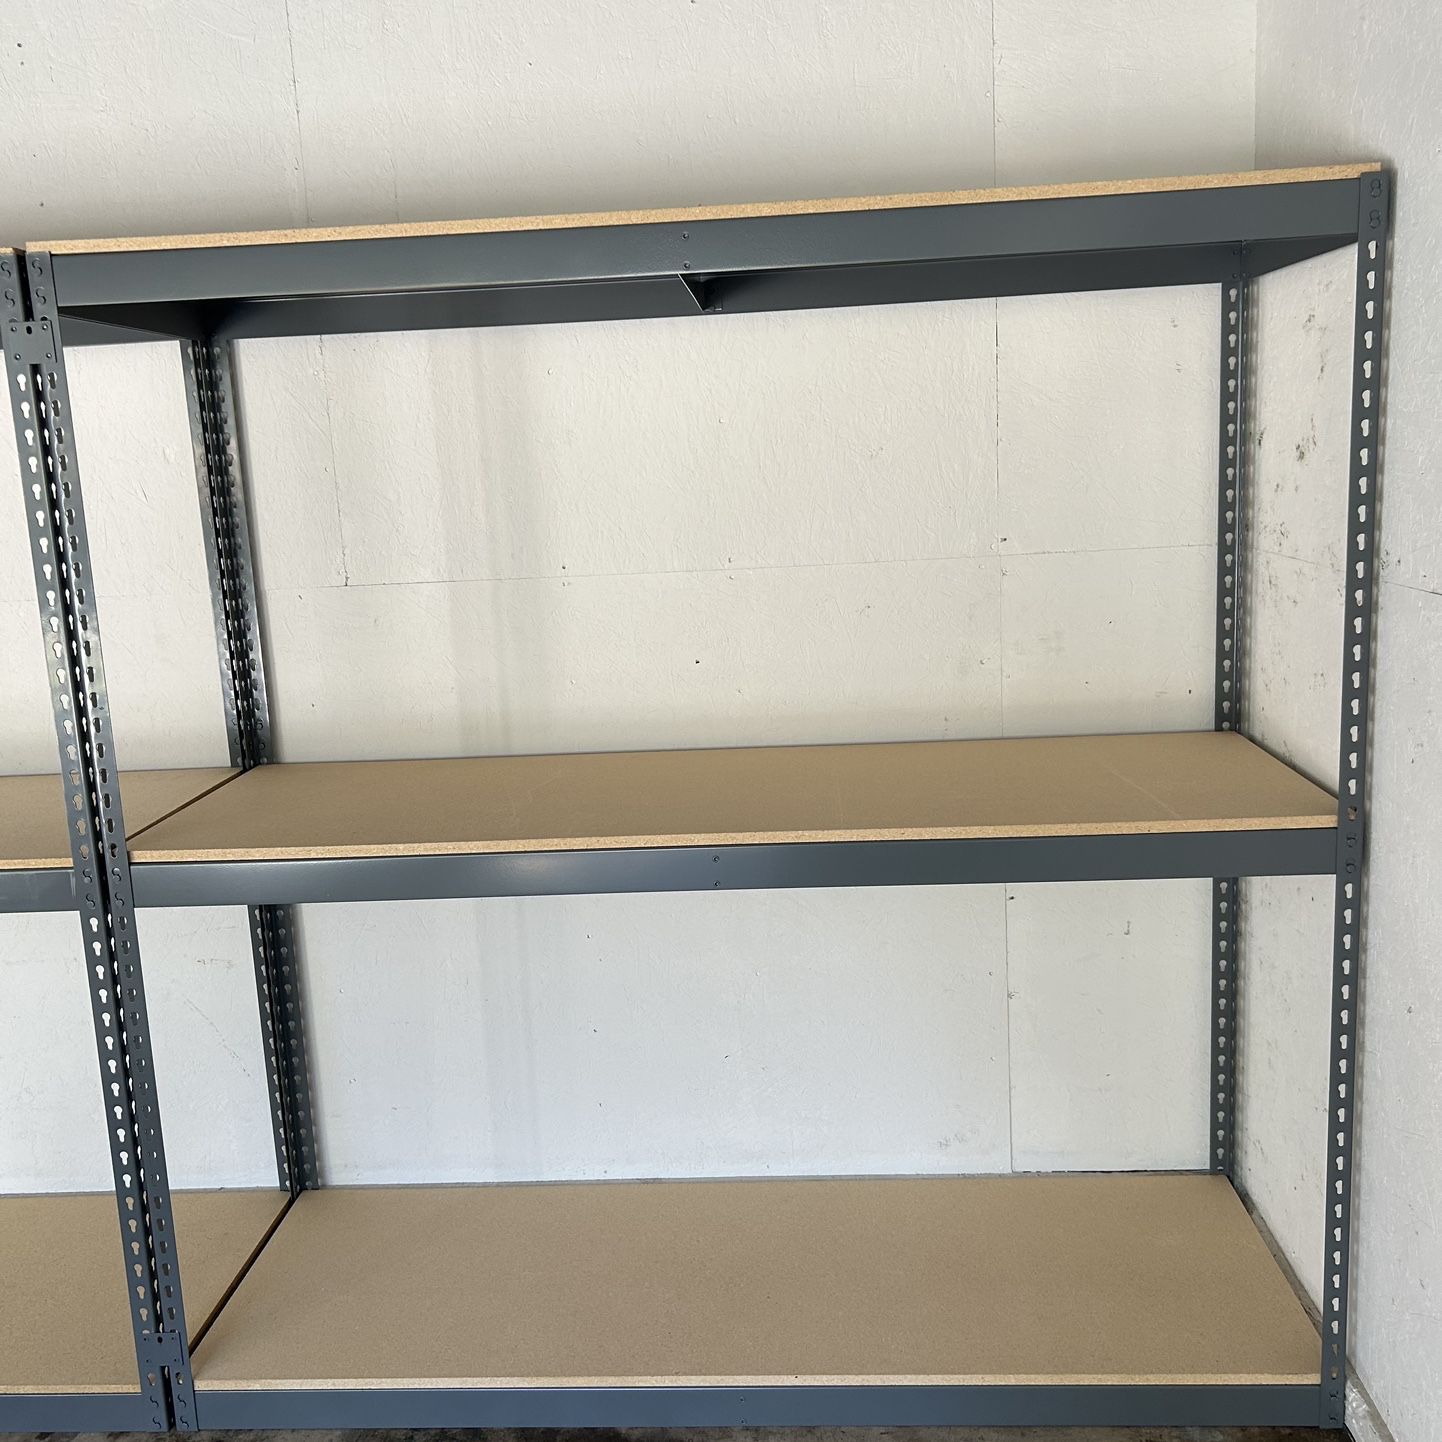 Industrial Shelving 72 in W x 24 in D Boltless Warehouse Shelves Garage Storage Racks New! Delivery Available